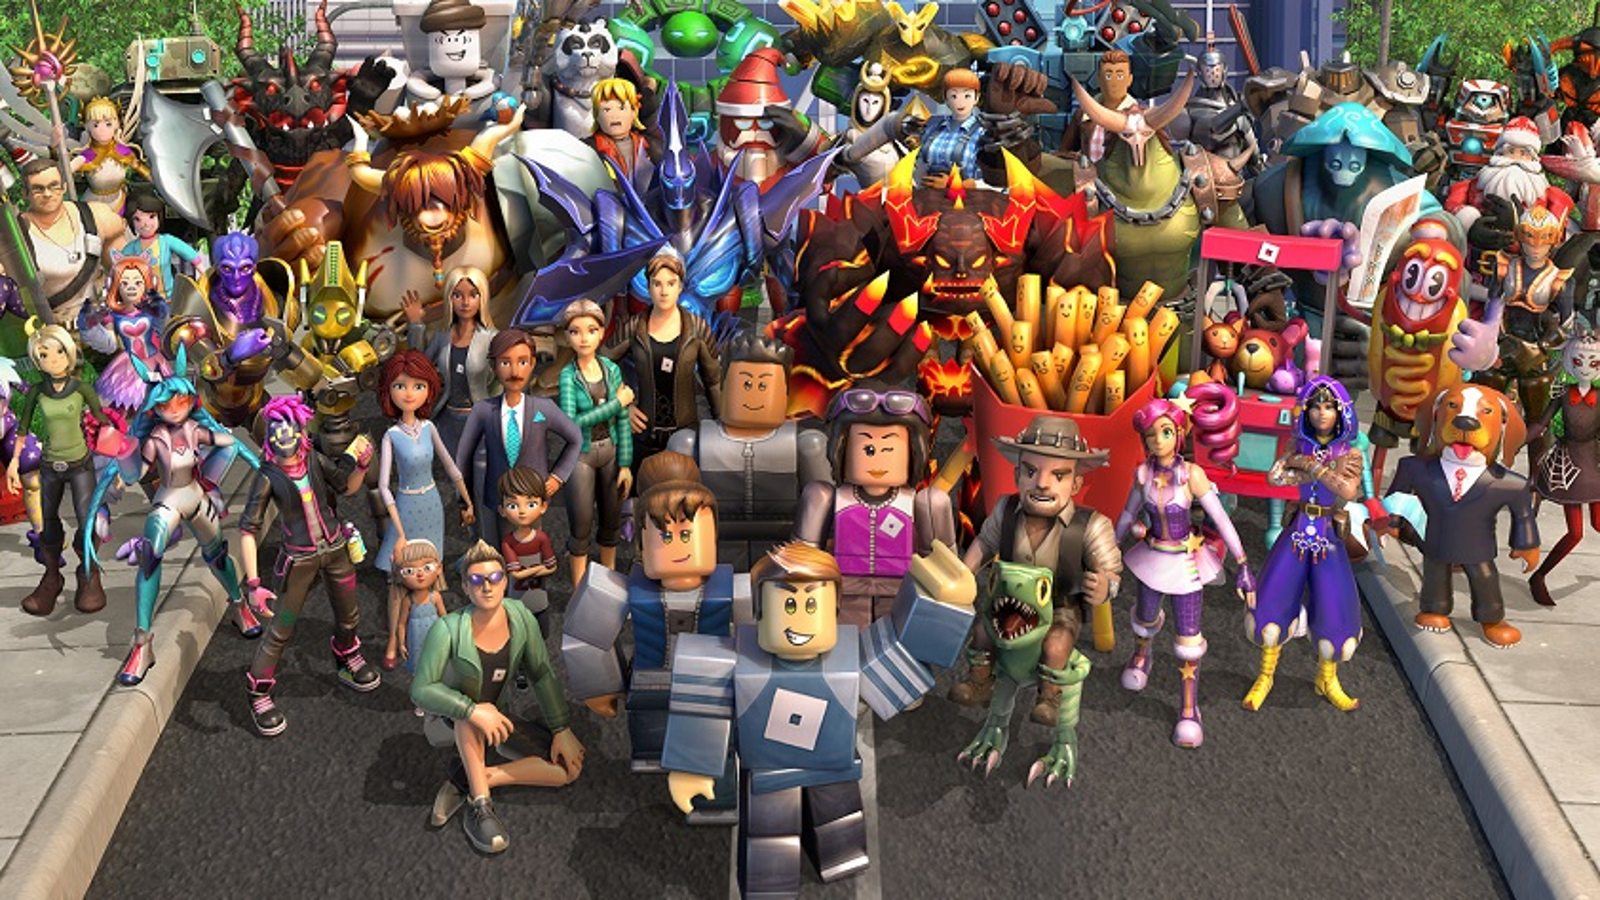 Boundless creativity or labor? Critics say Roblox hoards profits and  shortchanges kids' safety